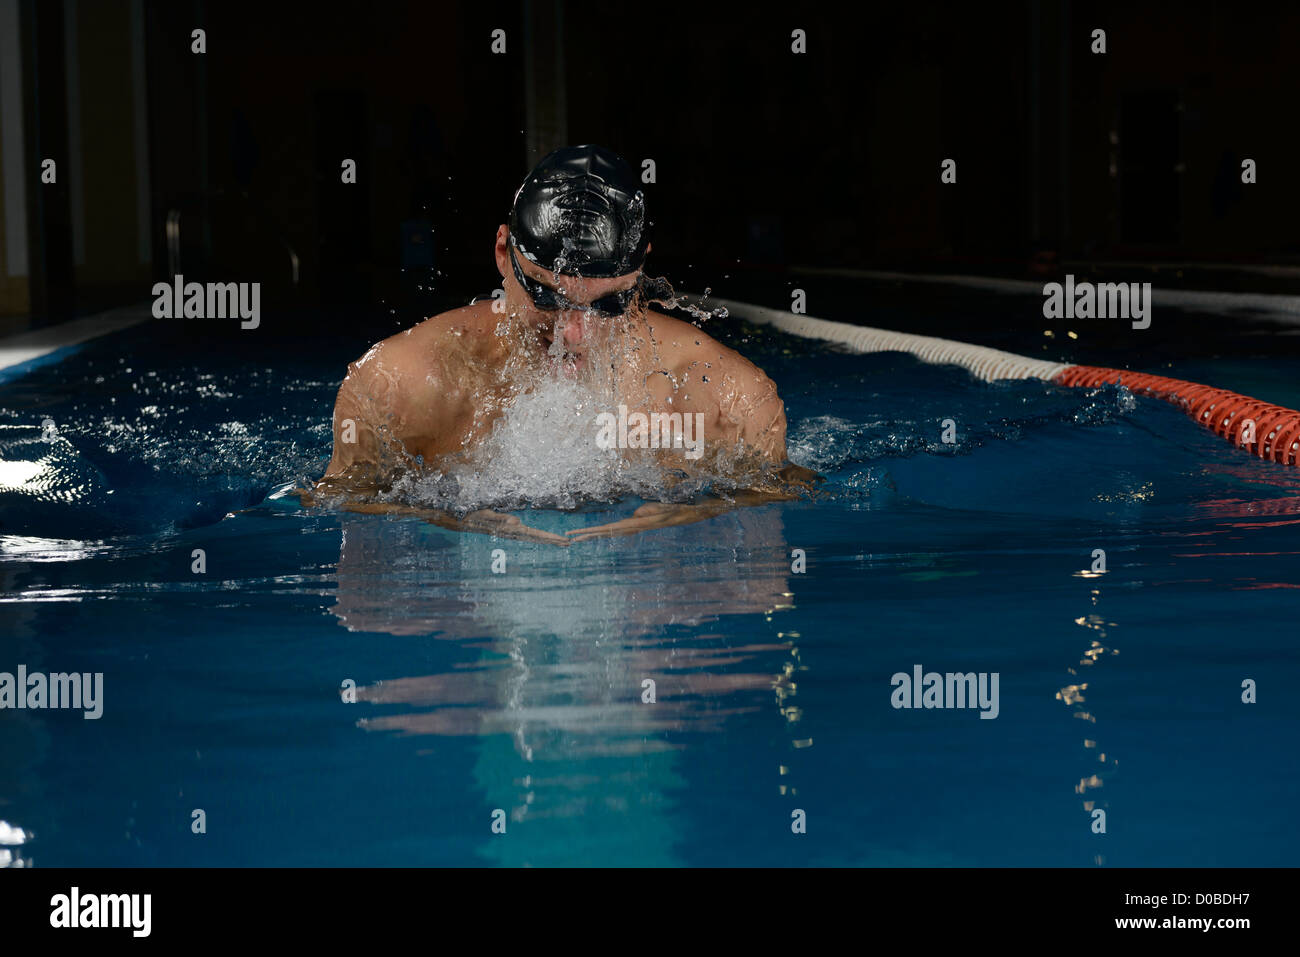 swimmer swimming pool water professional Stock Photo